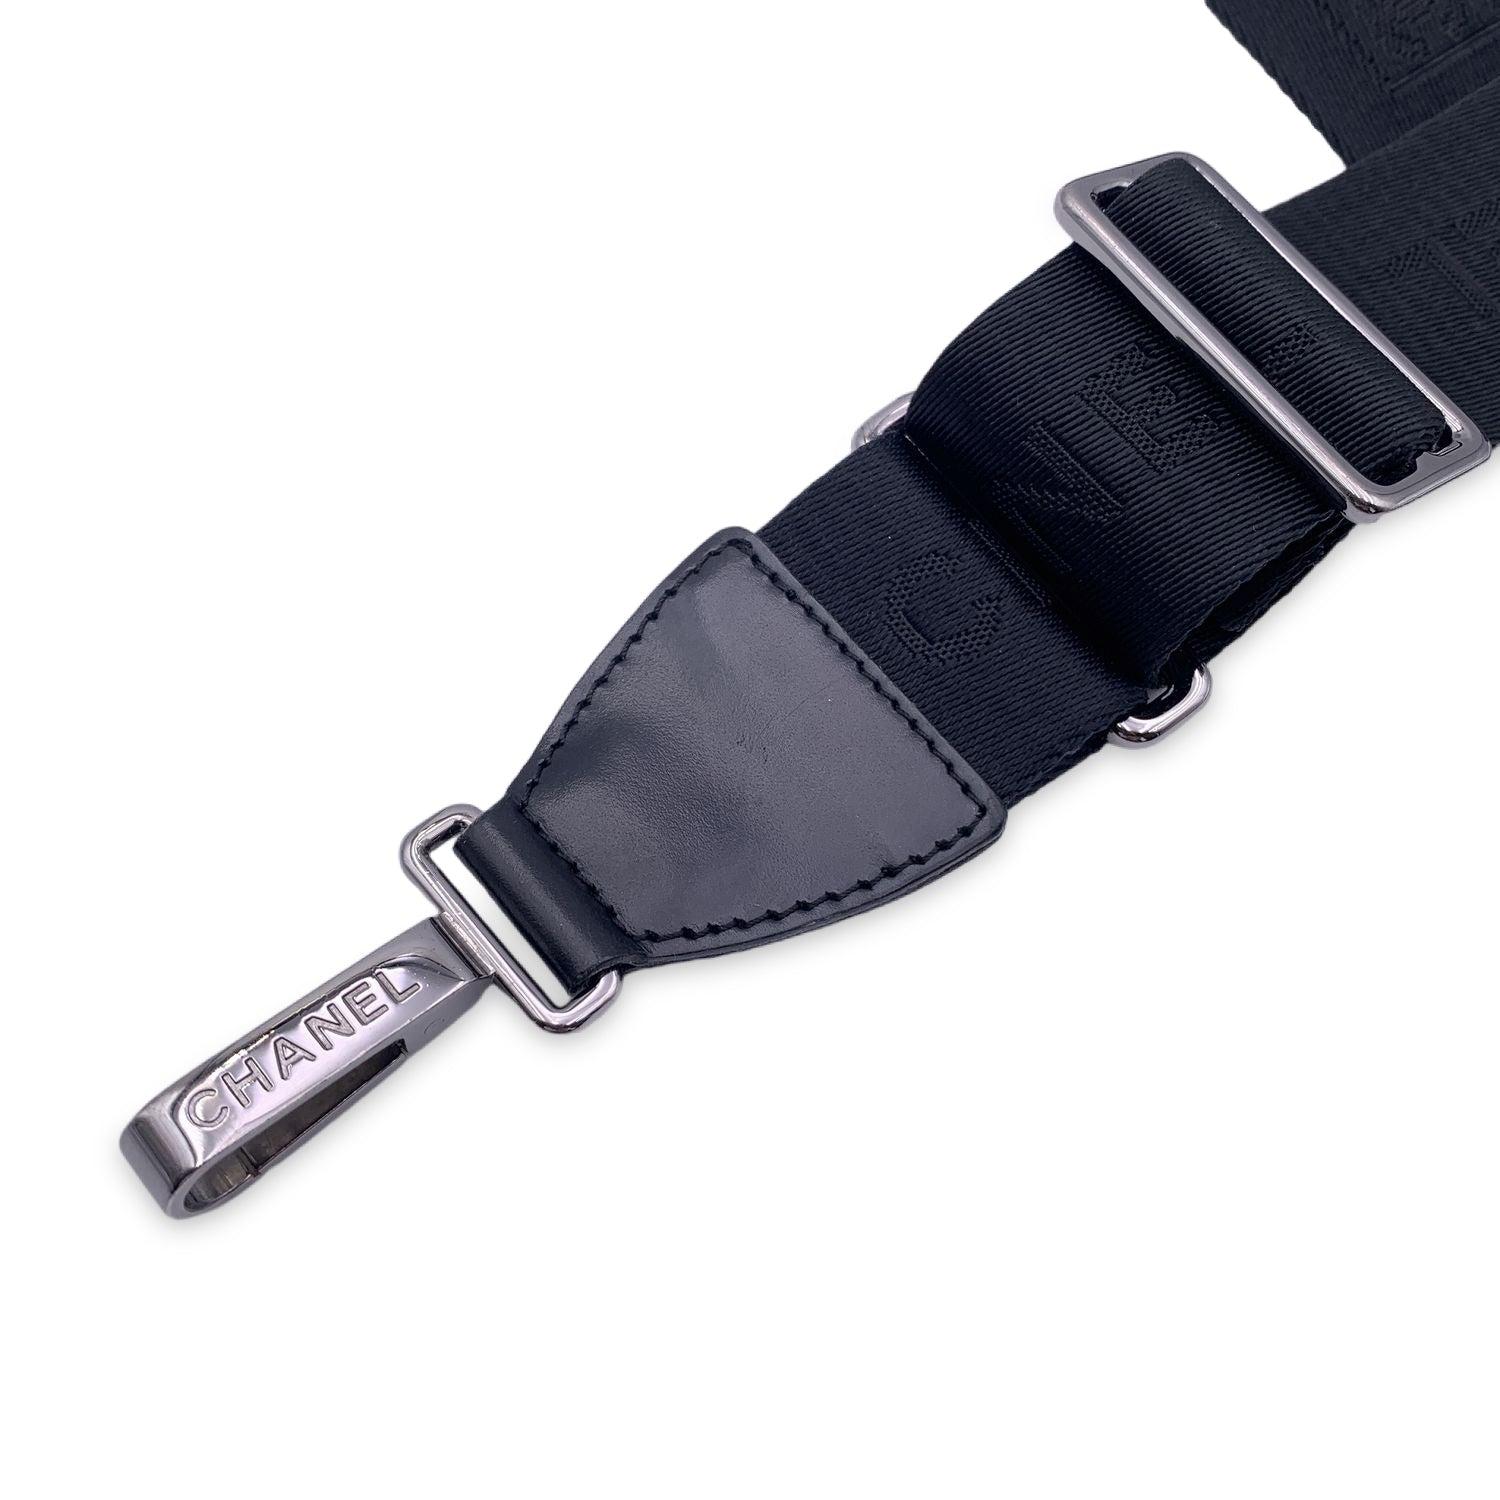 Chanel black nylon adjustable shoulder strap. CC logos and Chanel signatures on the strap and silver metal hardware. Can be attached to any bag on the shoulder or across the body. It can even be used for larger travel bags. Total lenght: 54 inches